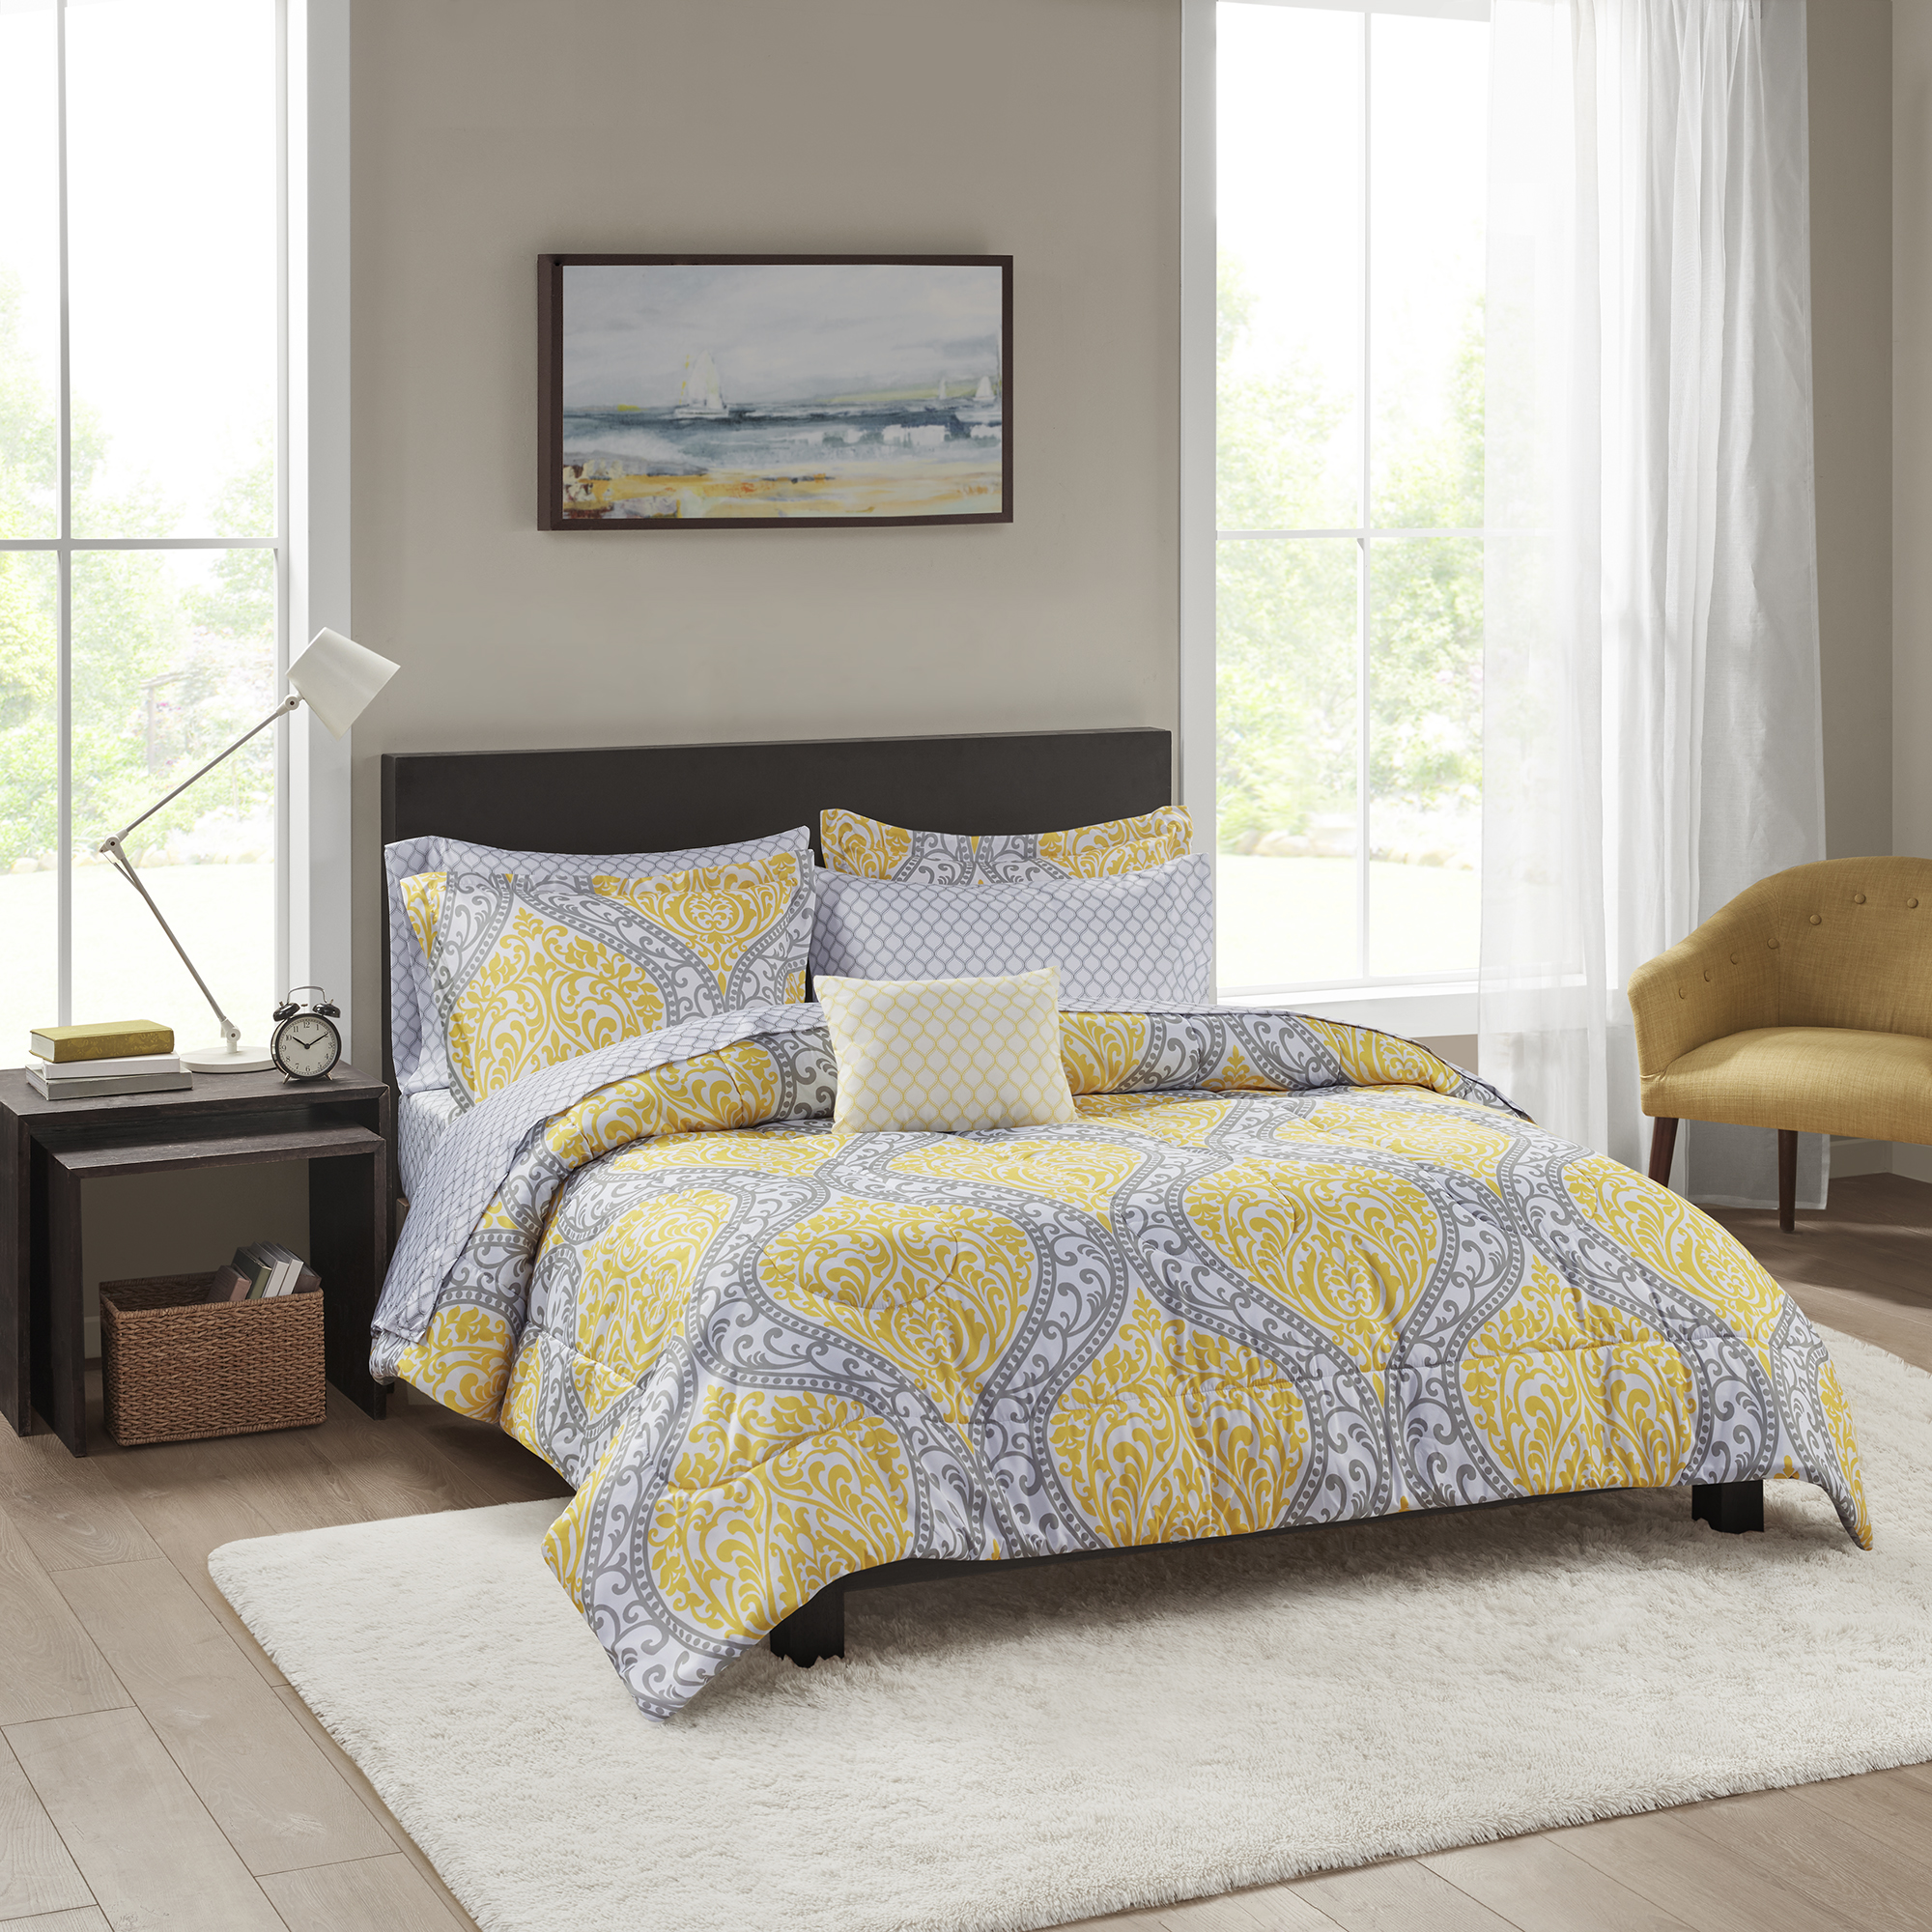 Mainstays Yellow Damask 8 Piece Bed in a Bag Comforter Set With Sheets, Queen - image 1 of 9